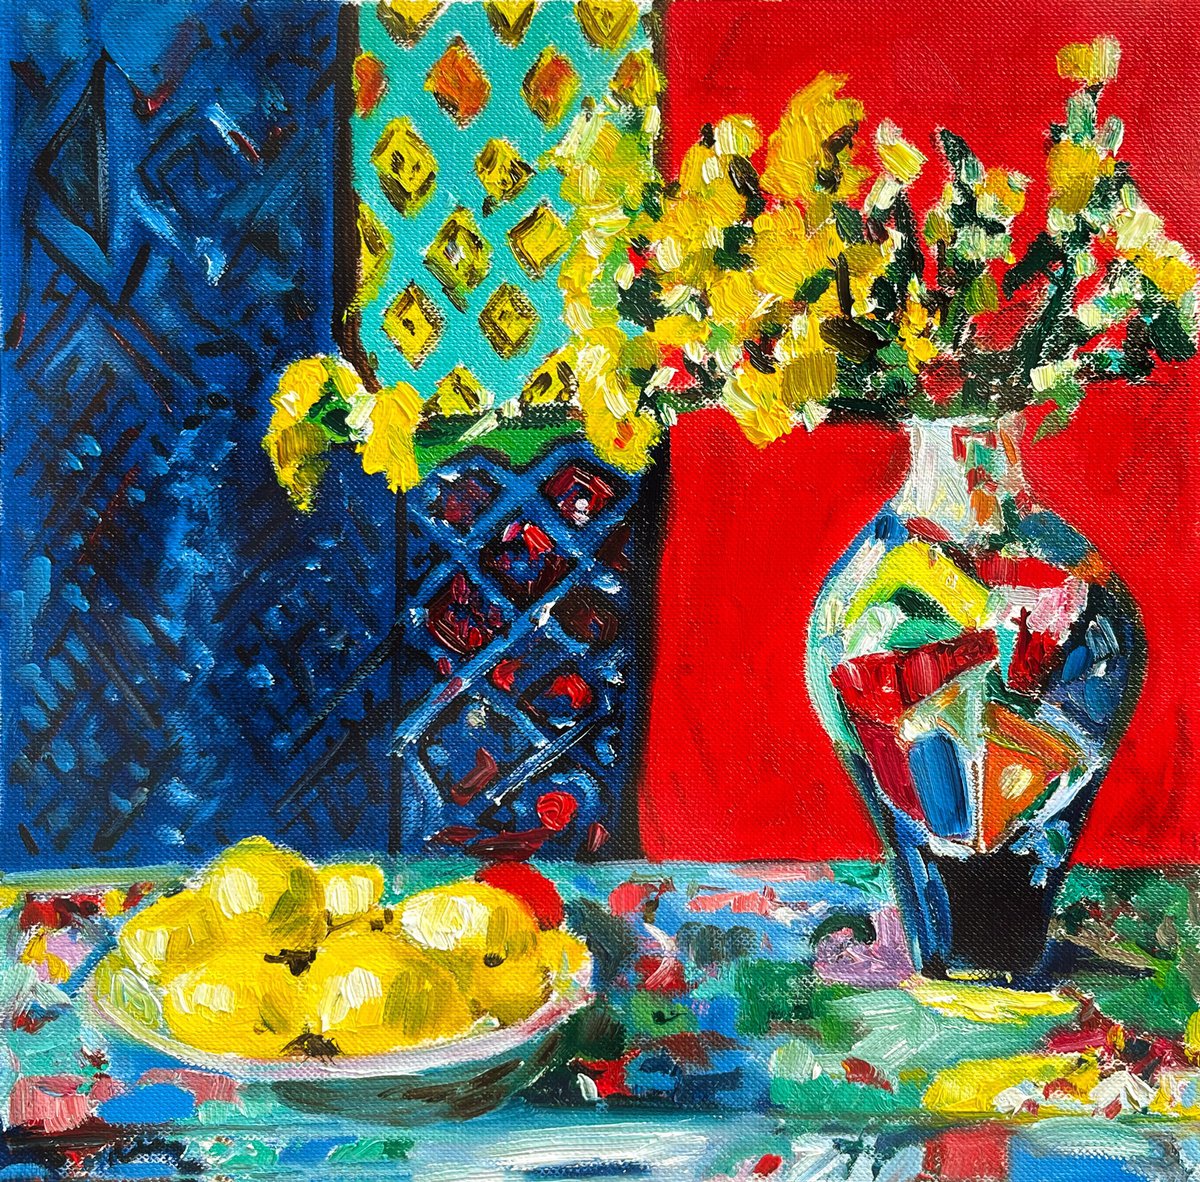 STILL LIFE WITH YELLOW FLOWERS by Maiia Axton